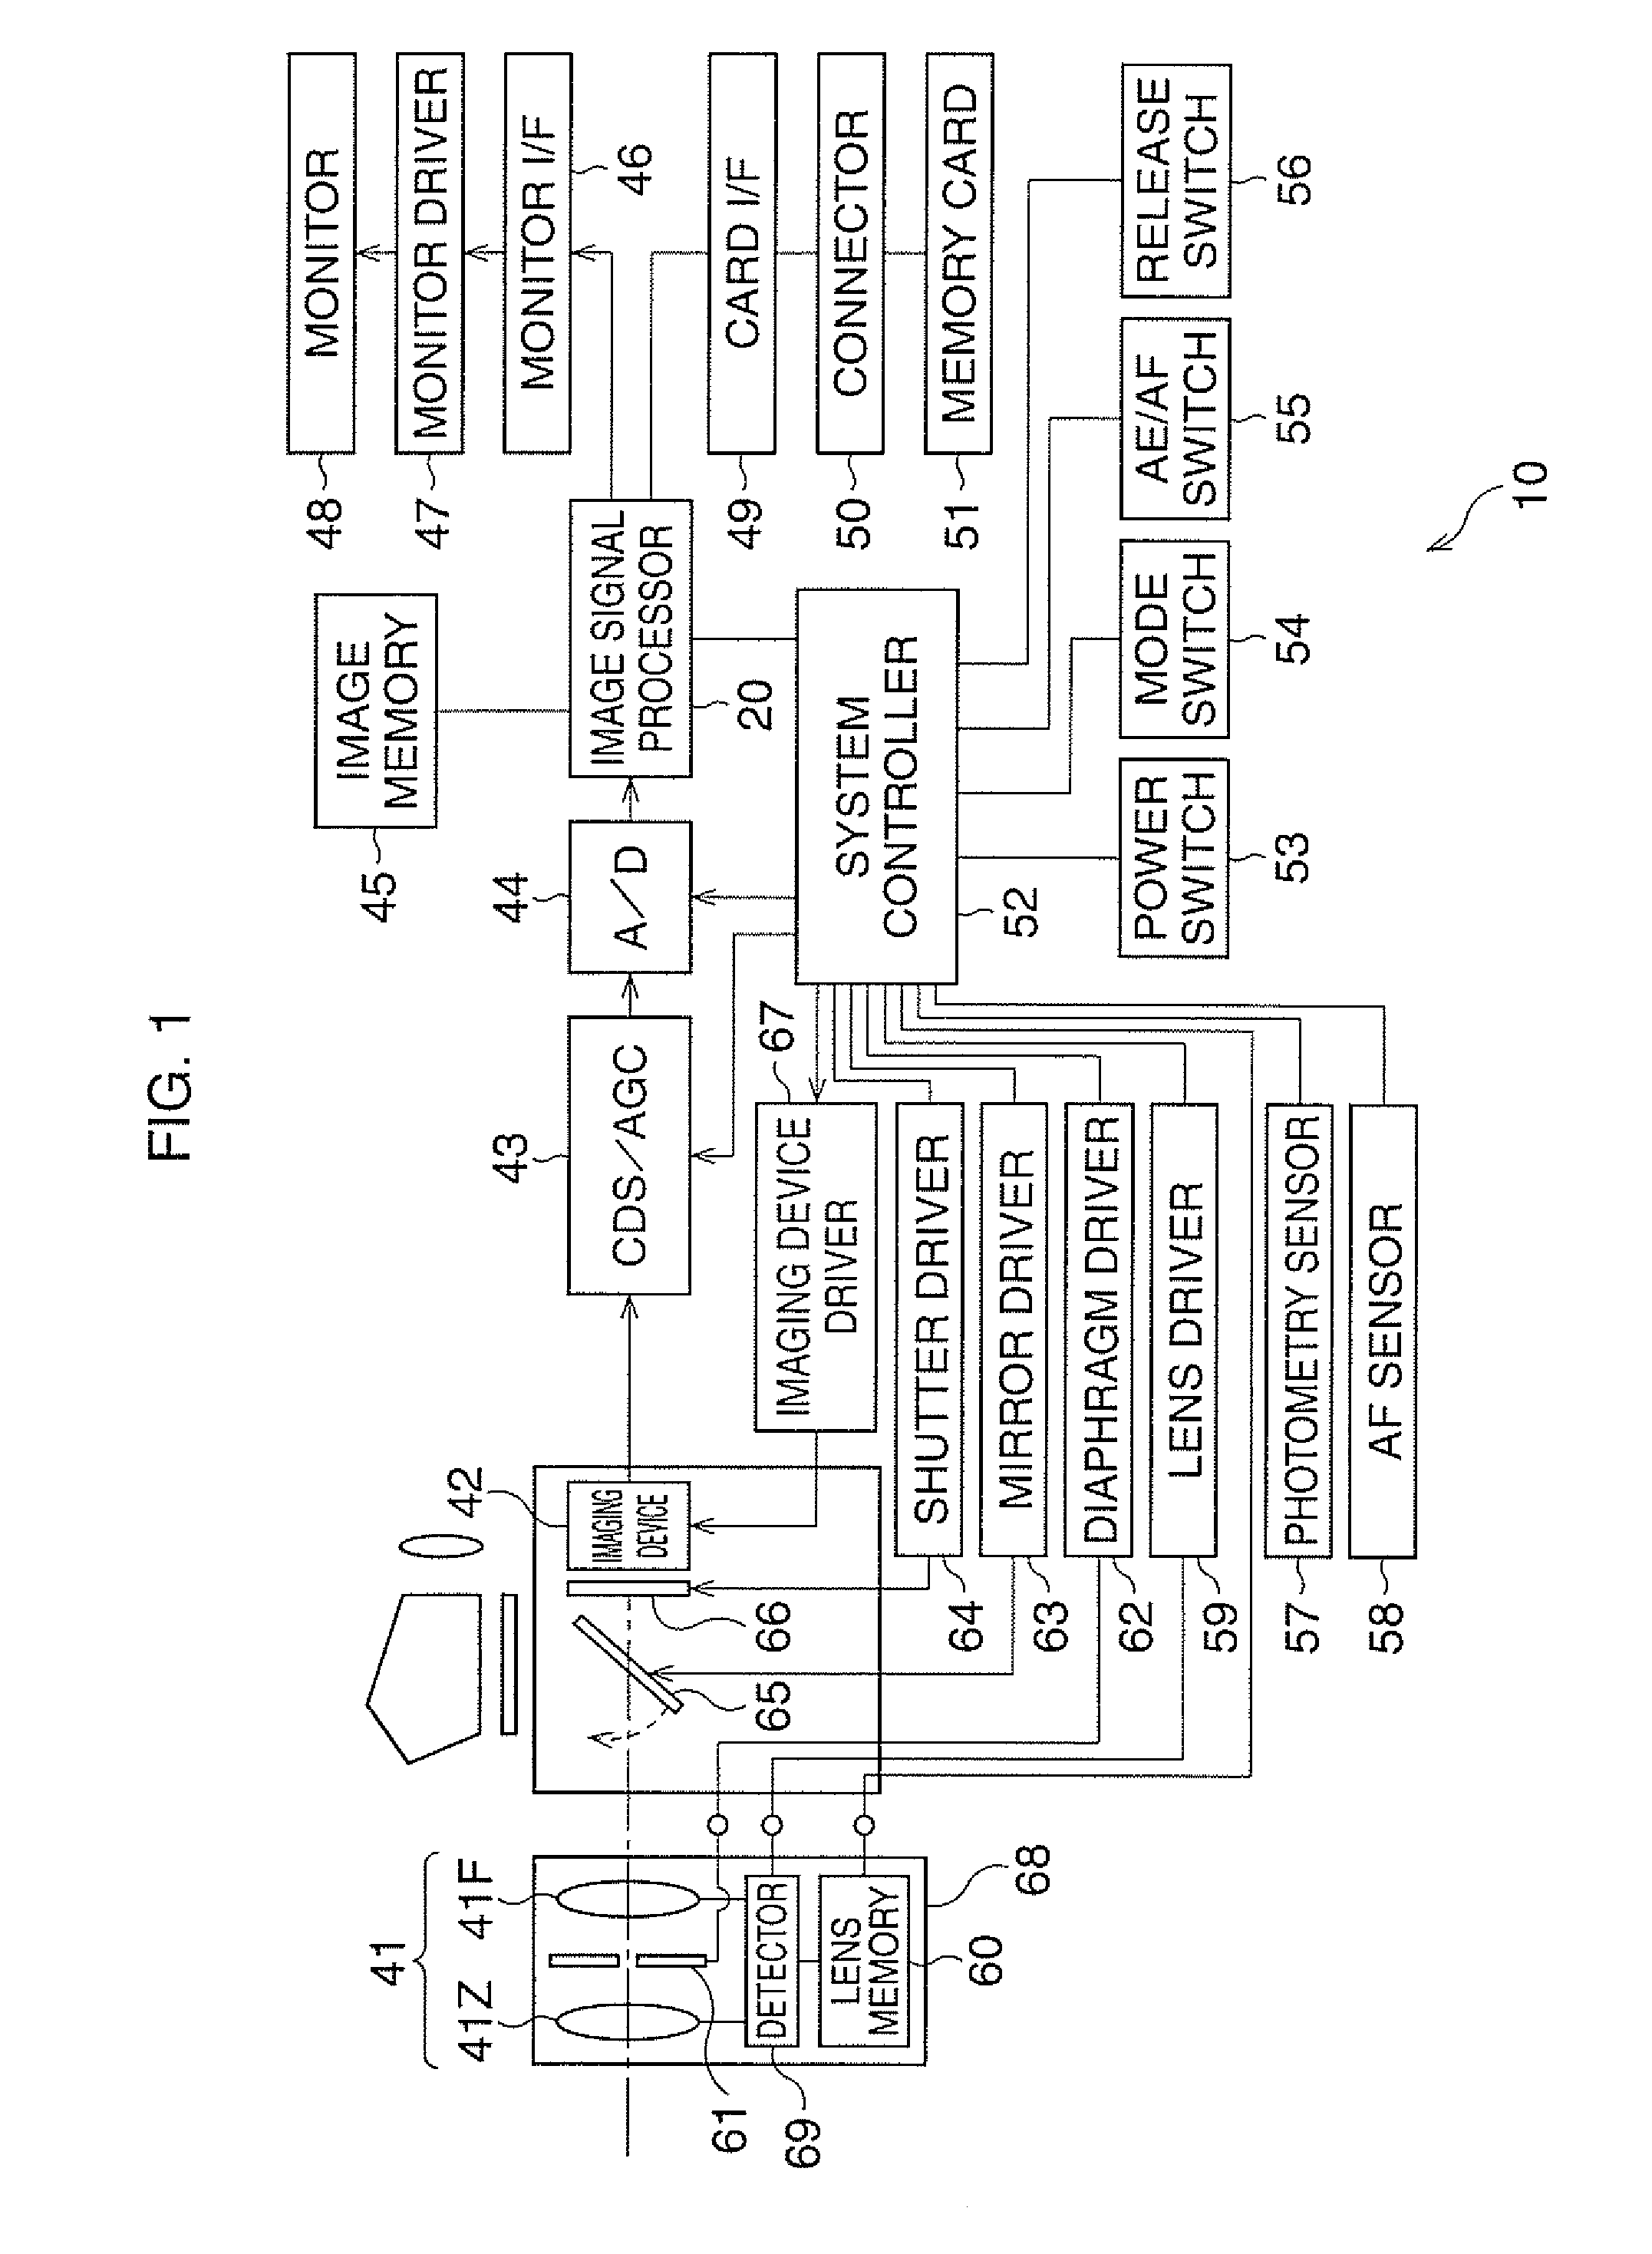 Image signal processor with white balance calculation based upon selected prediction area